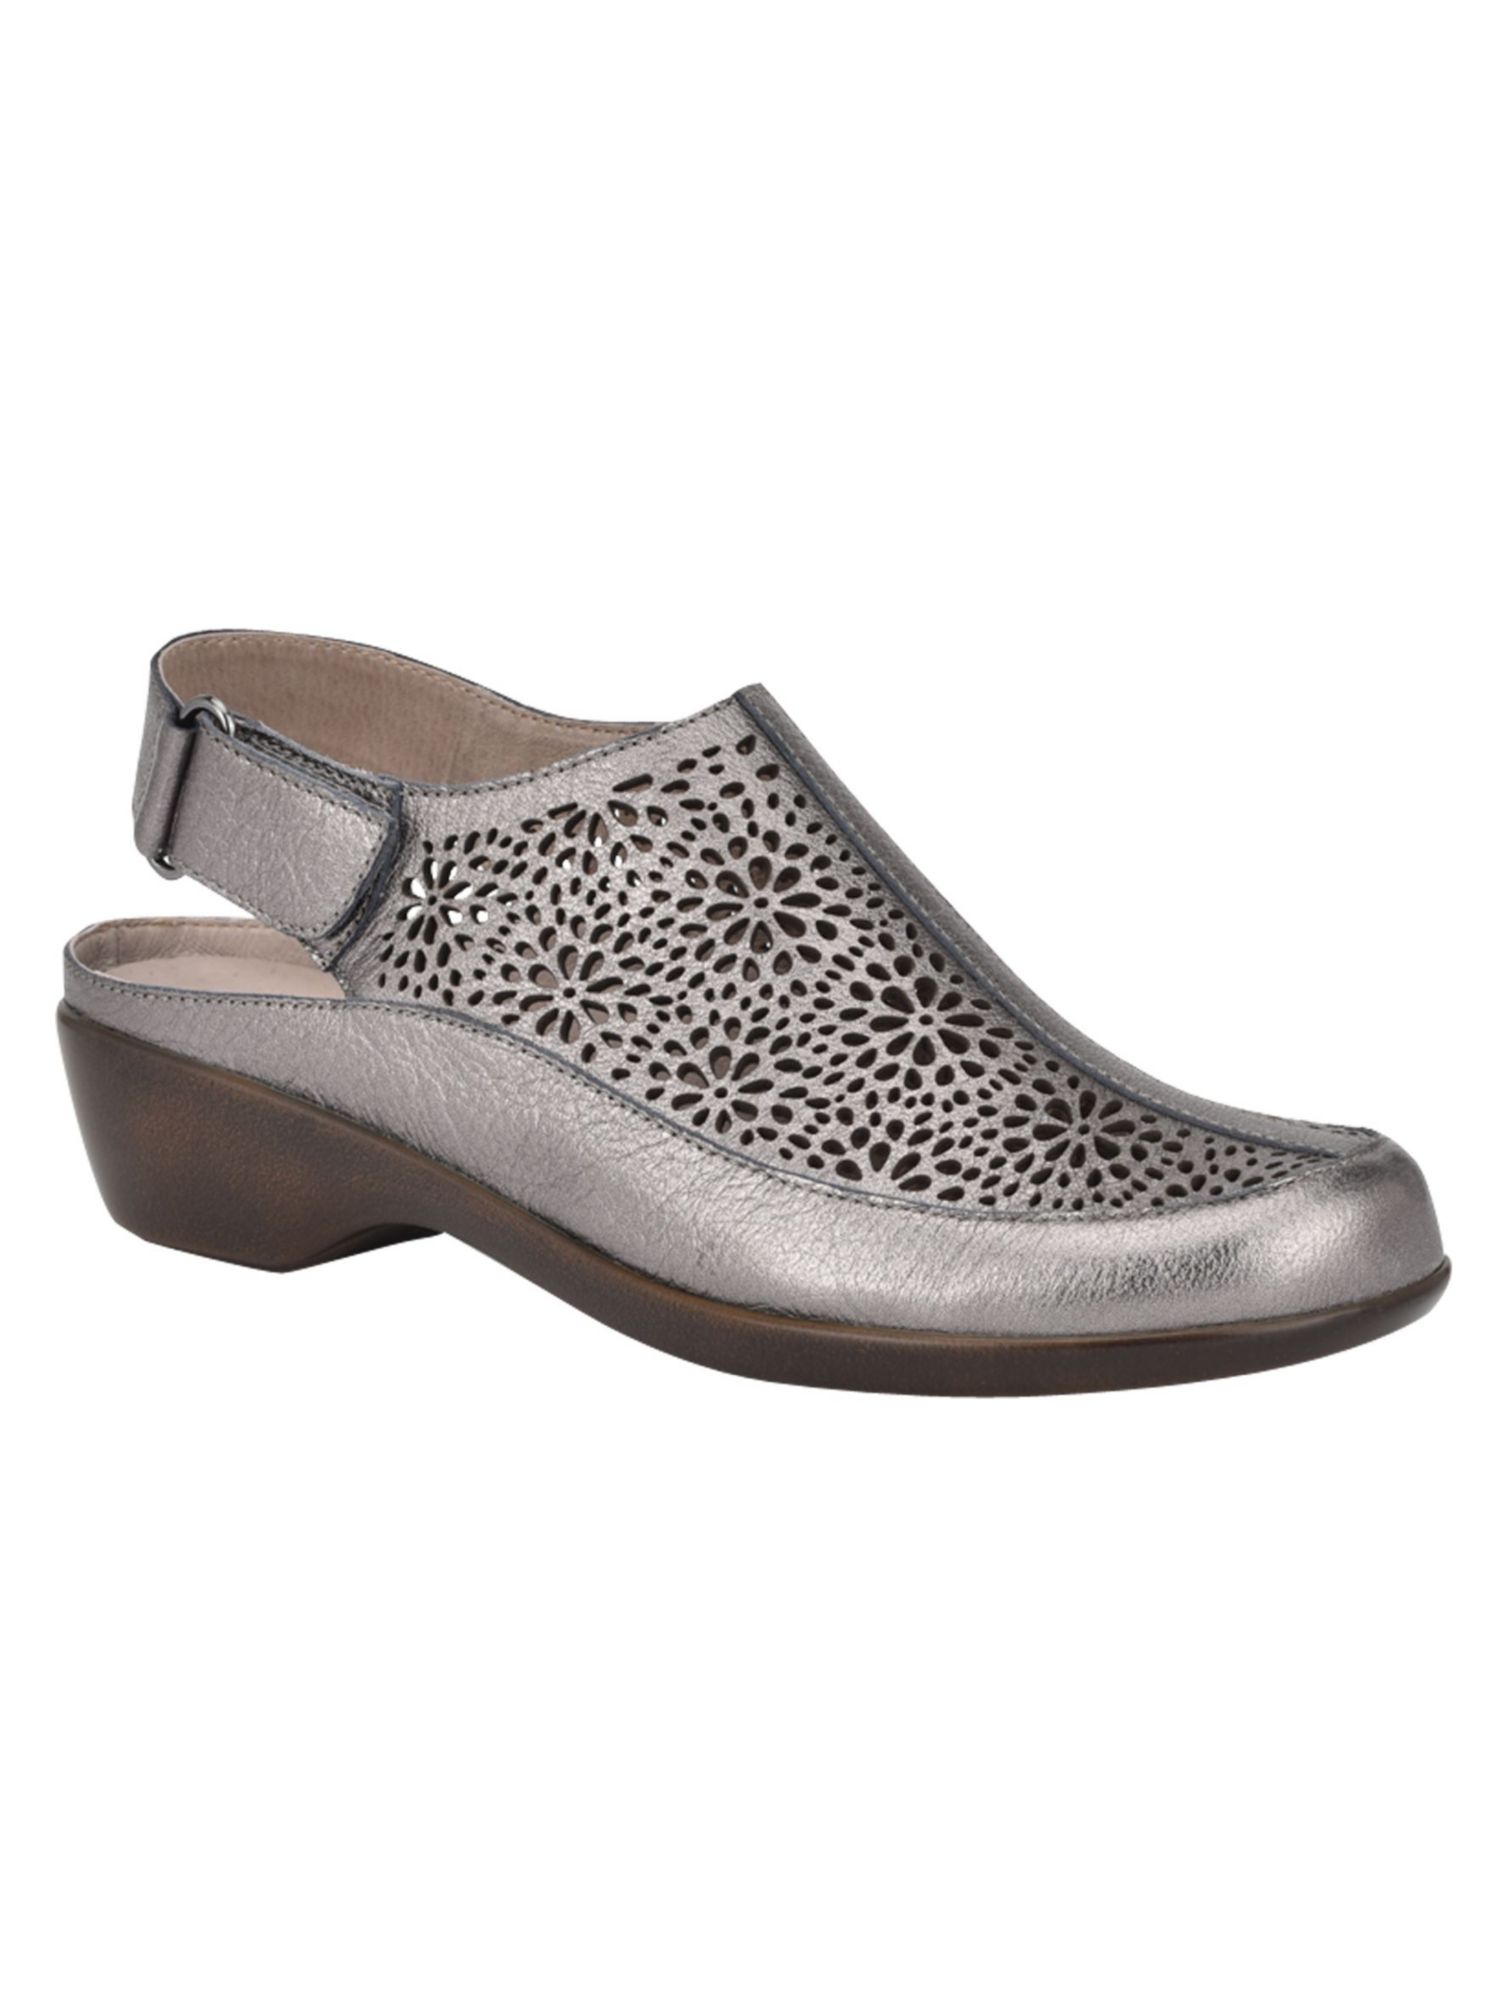 EASY SPIRIT Womens Silver Perforated Slingback Breathable Arch Support Cushioned Dawn Wedge Leather Clogs 10 W